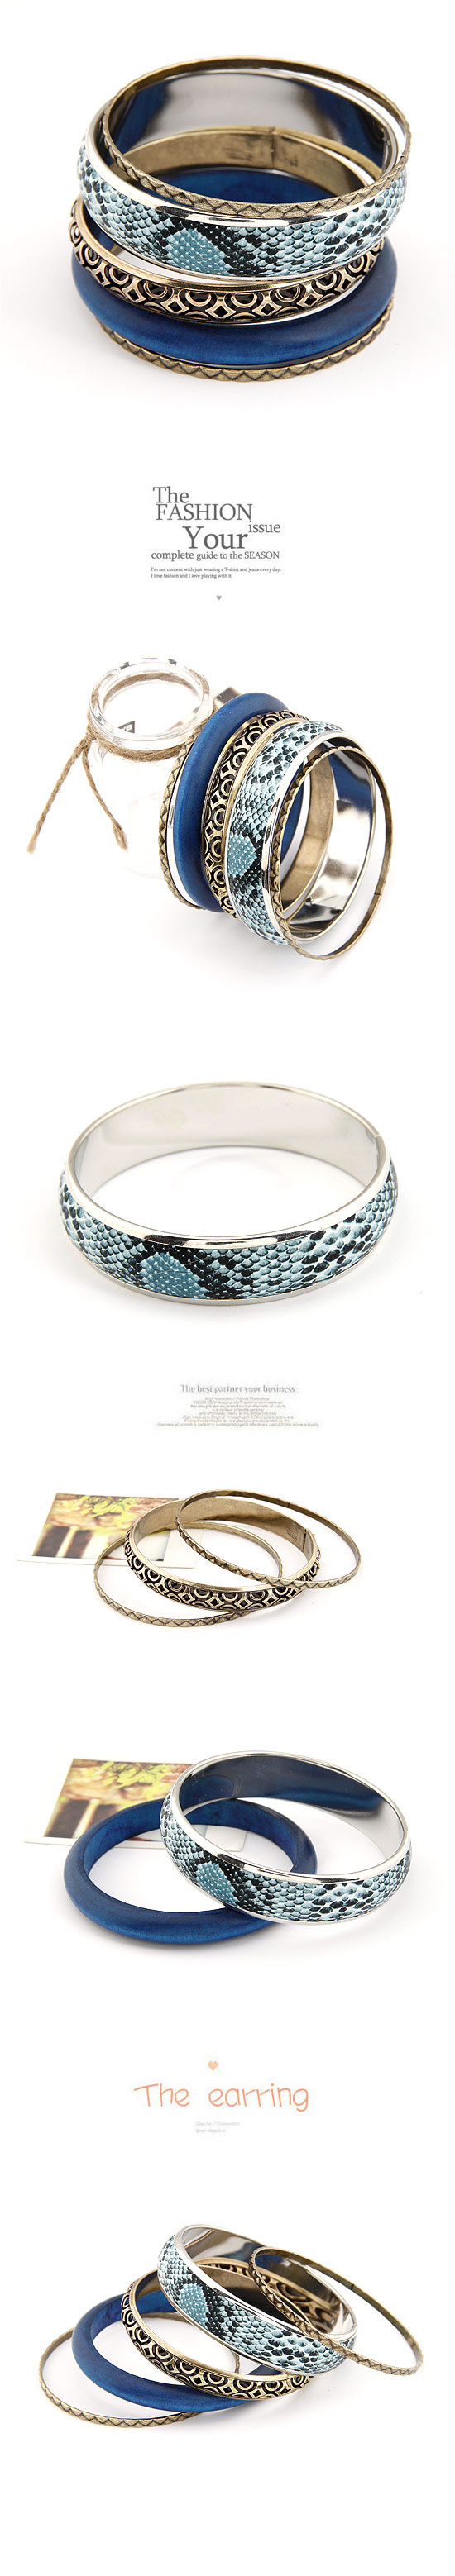 Stainless Sapphire Blue Multilayer Wood Alloy Fashion Bangles,Fashion Bangles